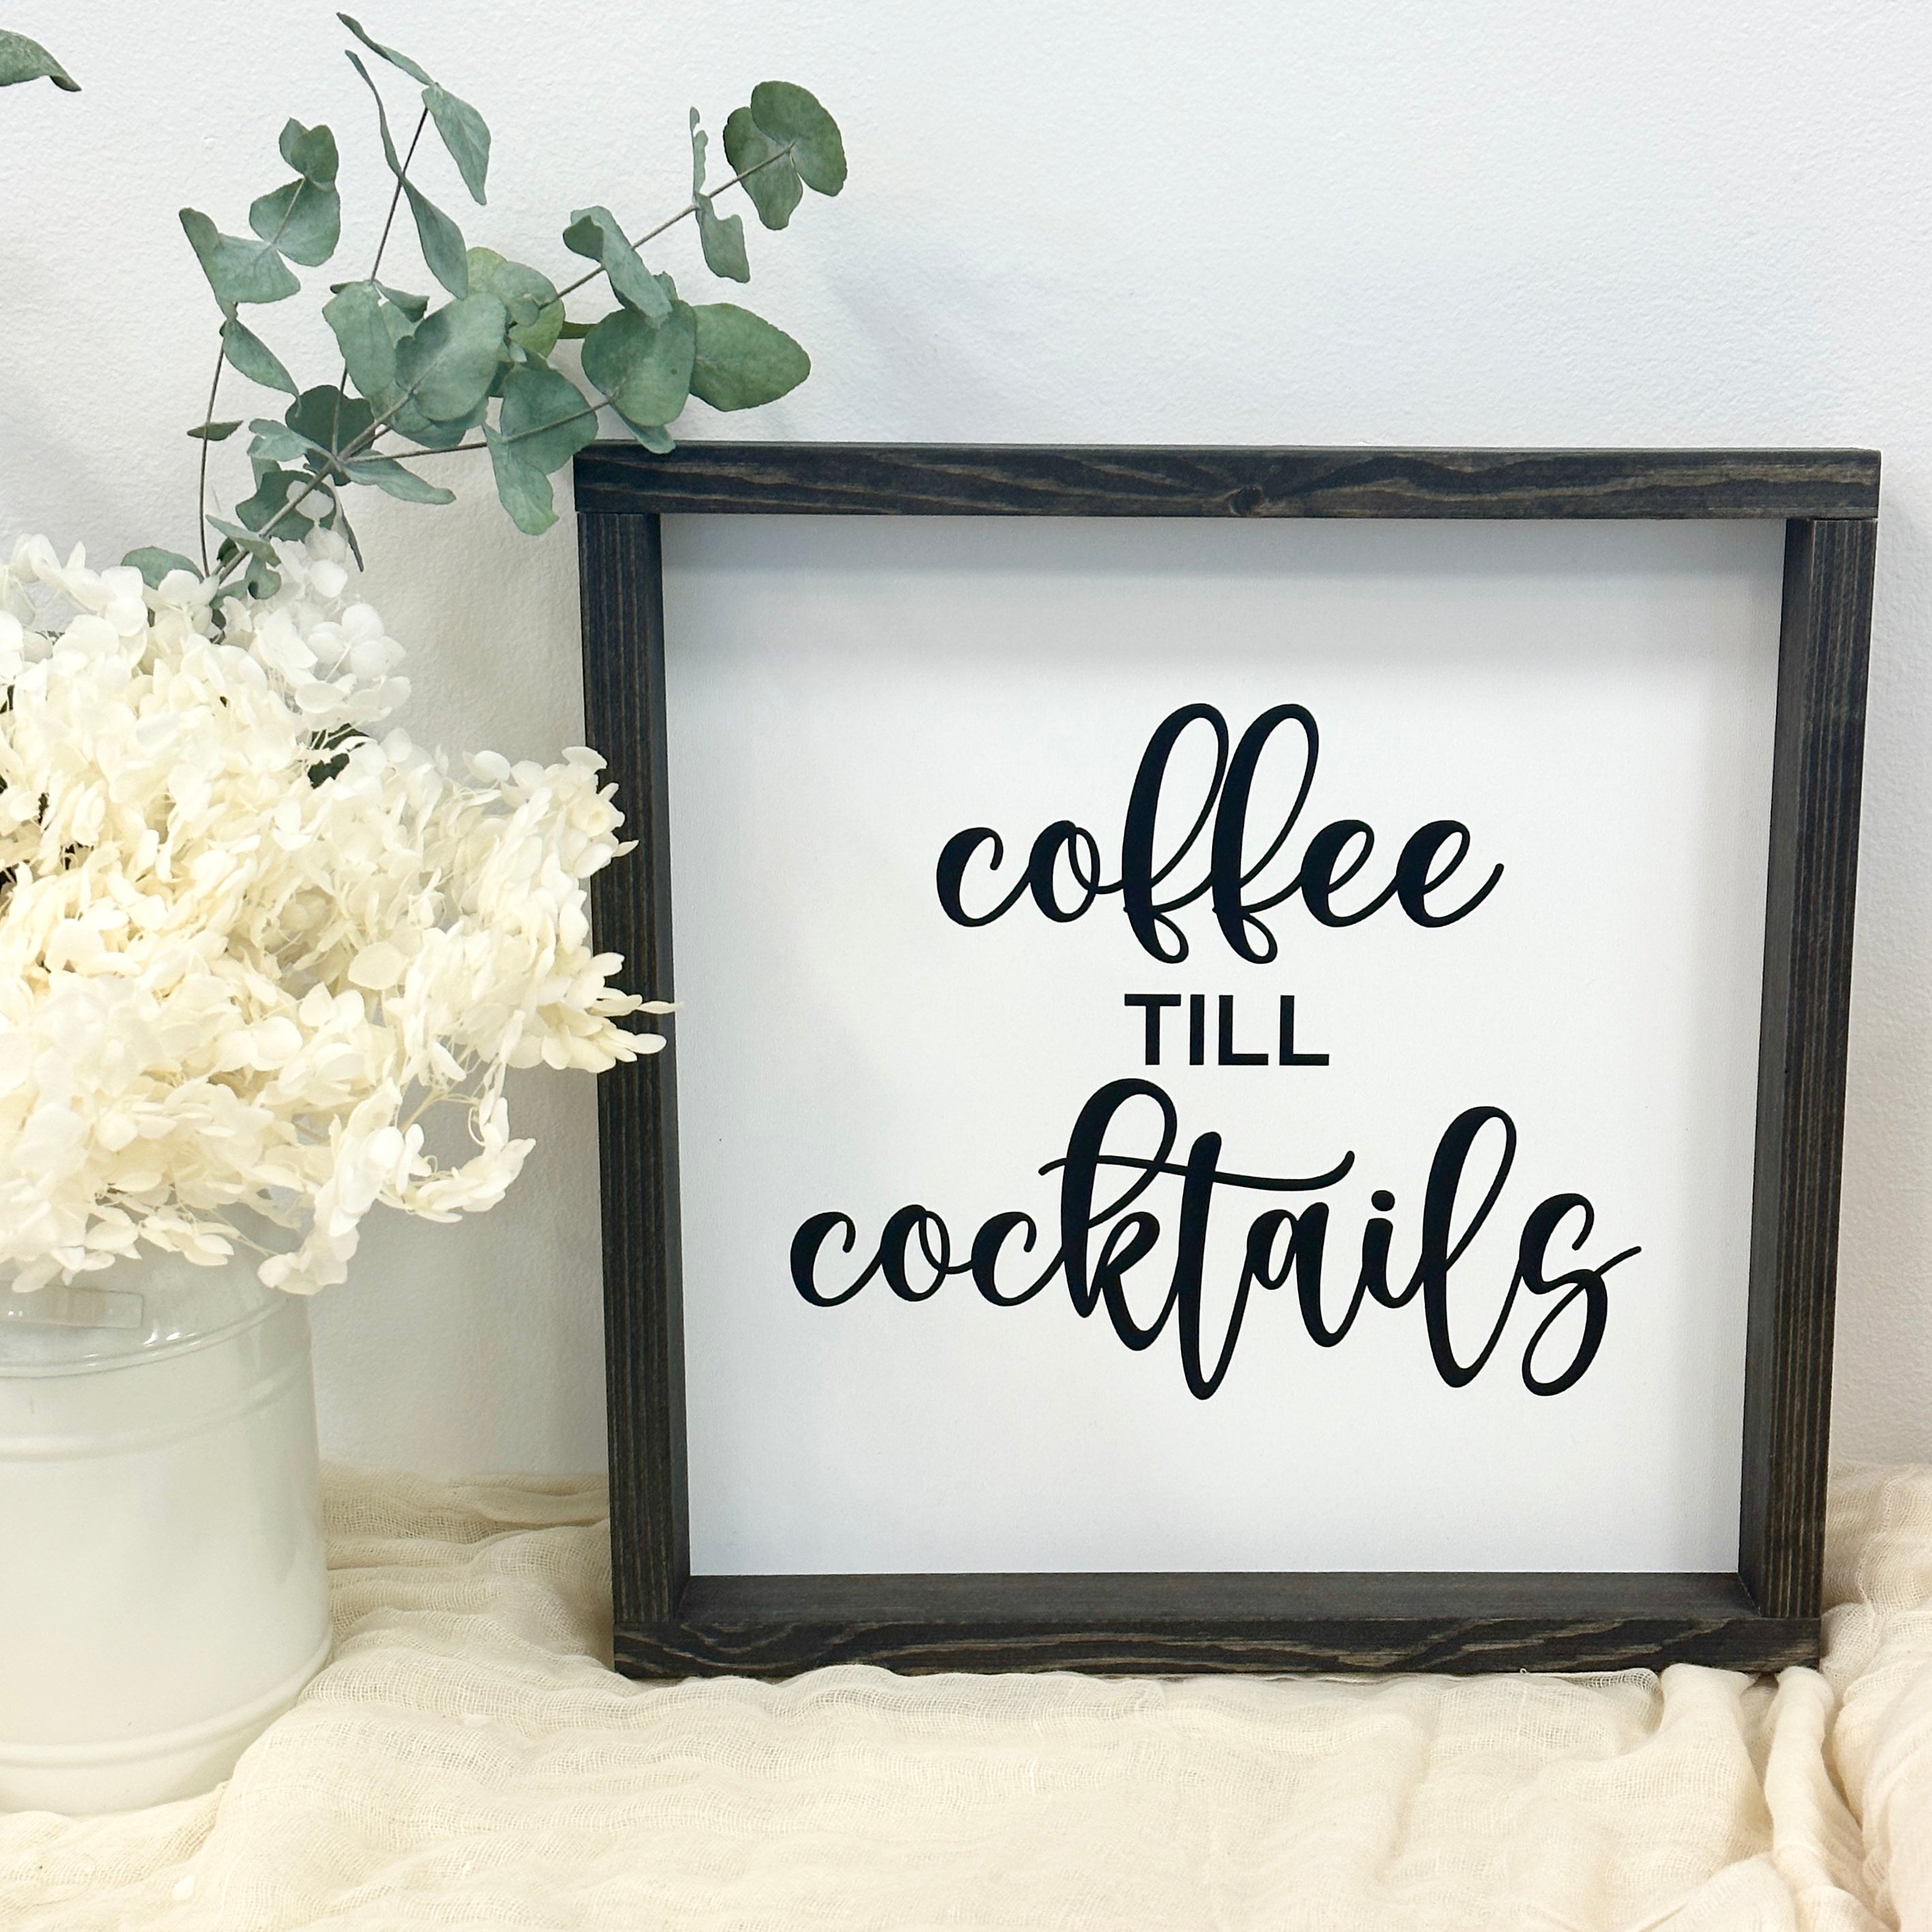 Wood Sign "Coffee Till Cocktails"